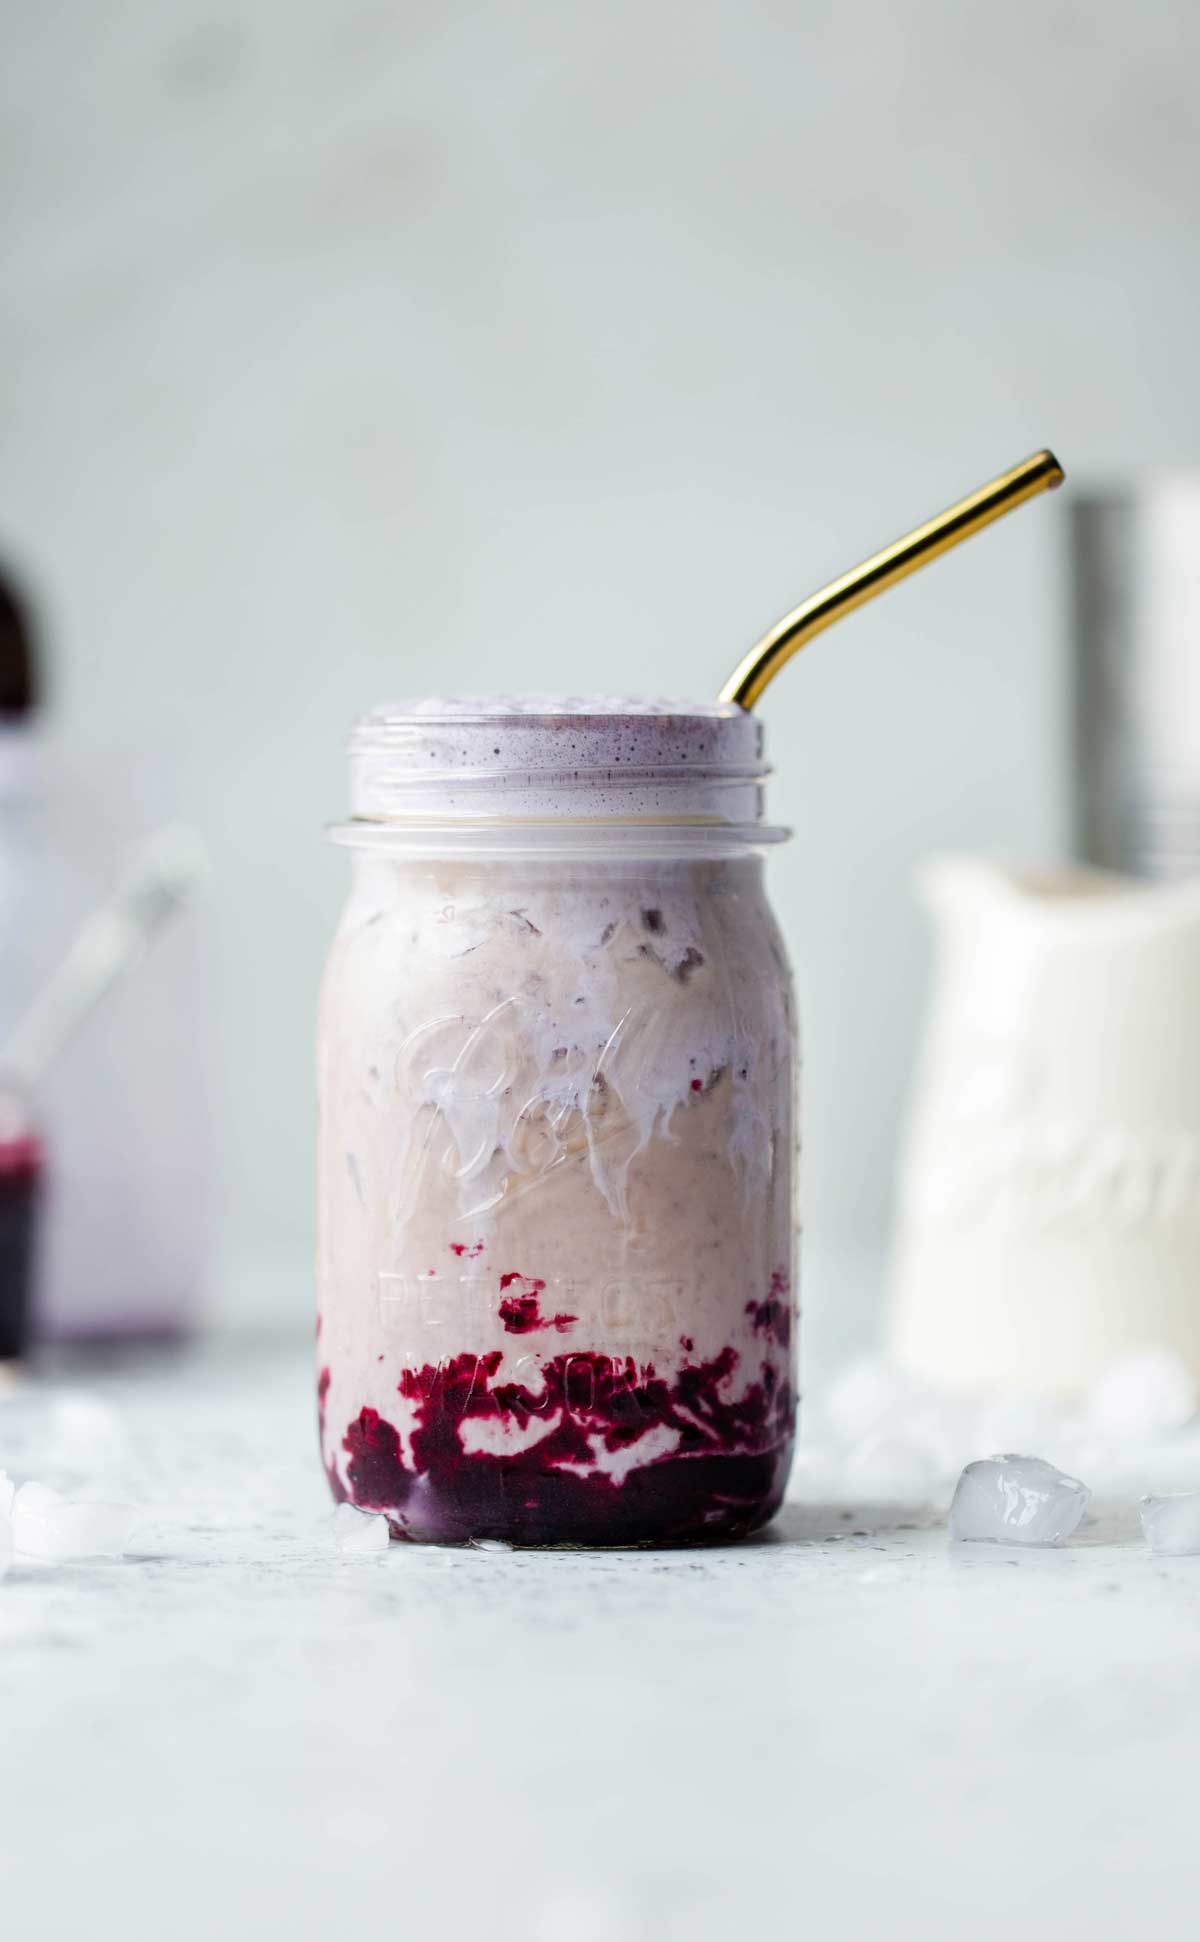 Iced Cinnamon Brown Sugar Blueberry Coffee is a fruity iced coffee recipe sweetened with blueberry brown sugar puree and topped with a layer of luscious blueberry cold foam soft top.